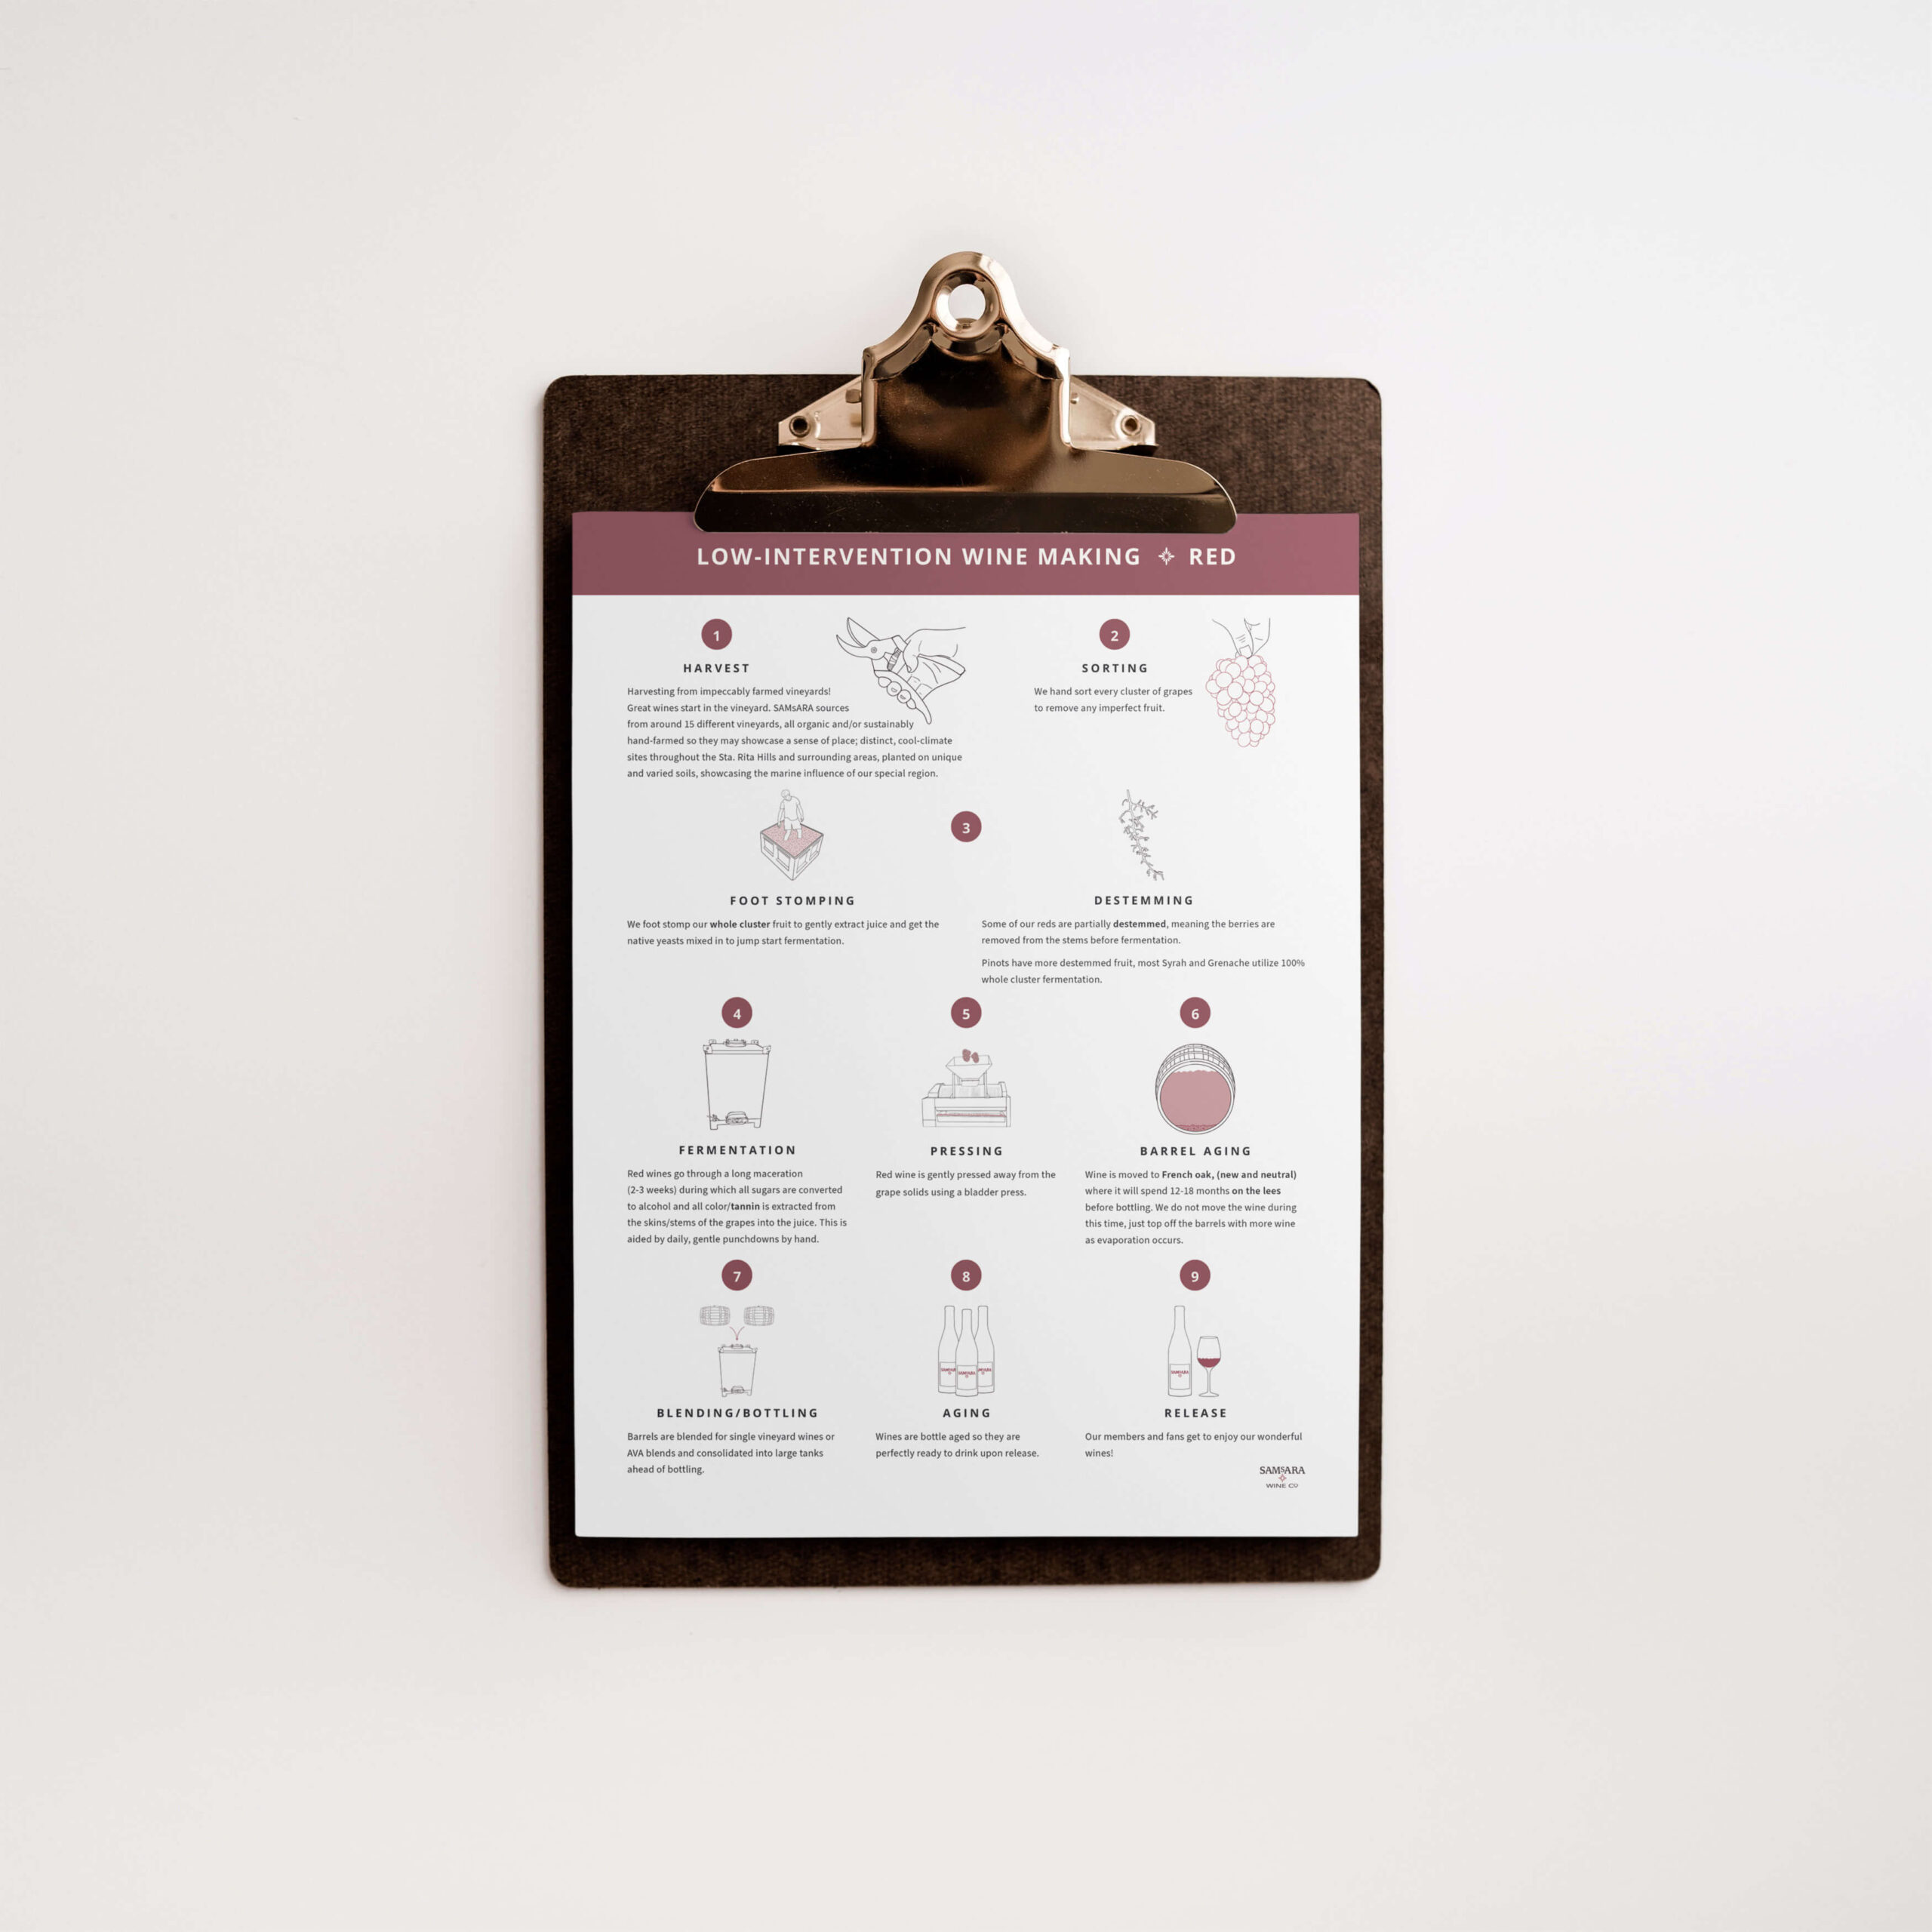 Clipboard holding a piece of paper with an infographic on low-intervention wine making process of red wine.